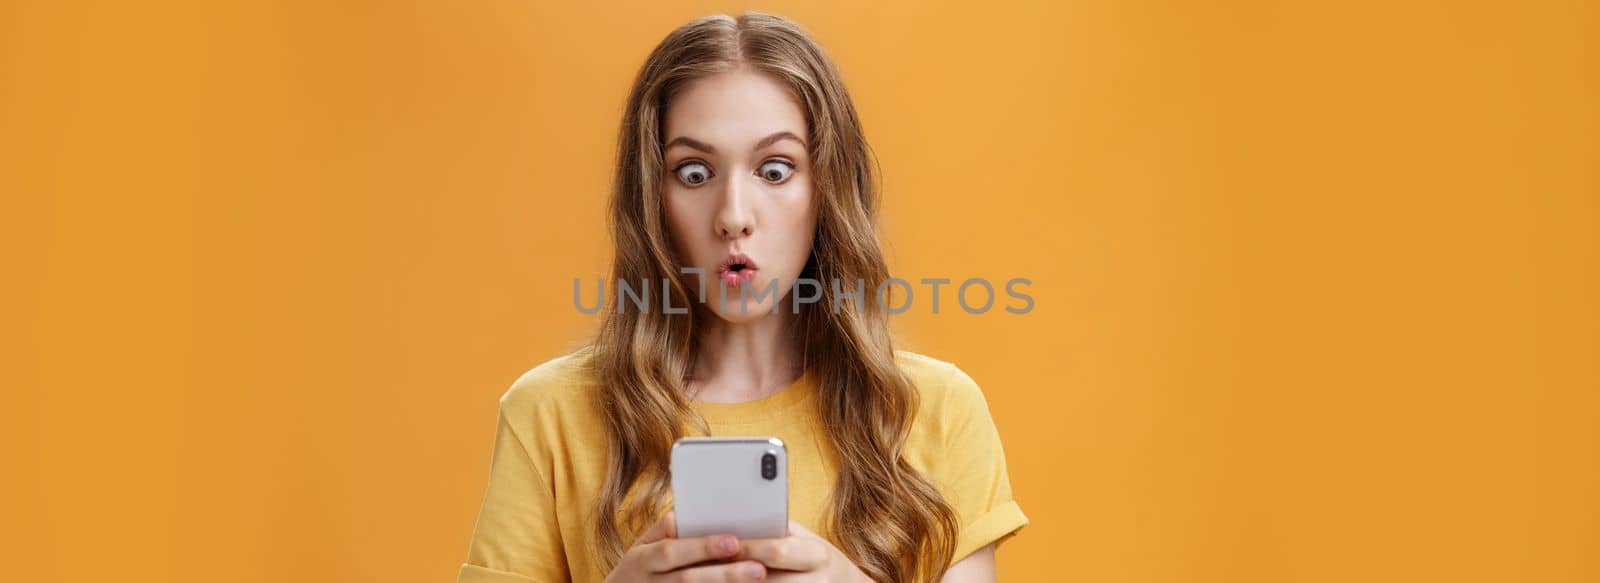 Young girl shocked reading messages in friends smartphone folding lips popping eyes in amazement at cellphone screen folding lips with interest and excitement posing over orange background. Emotions and technology concept